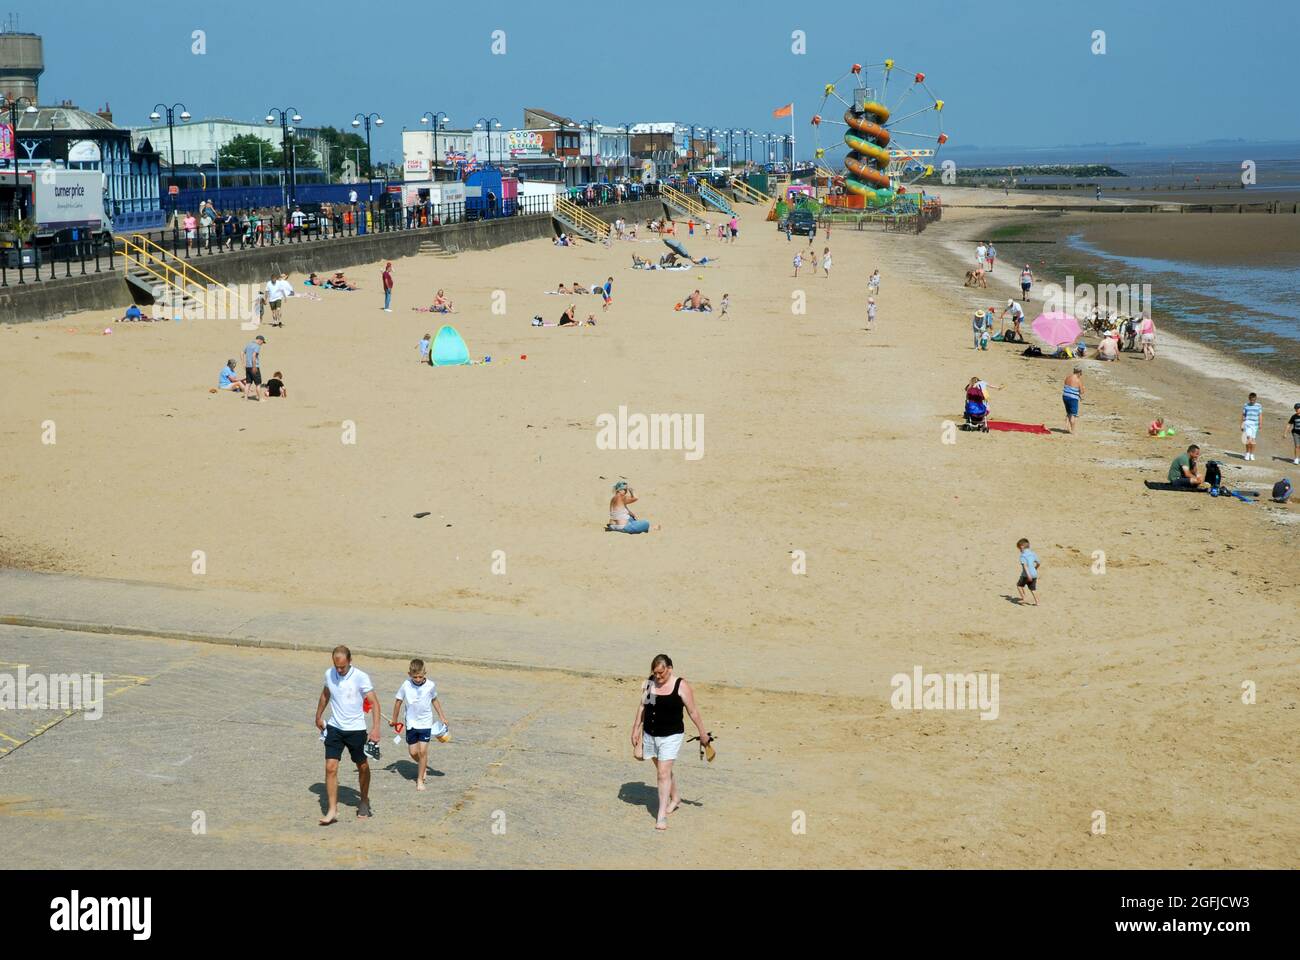 People enjoying the summer sunshine on a sandy beach in the picturesque seaside town of Cleethorpes, Lincolnshire. UK. Stock Photo